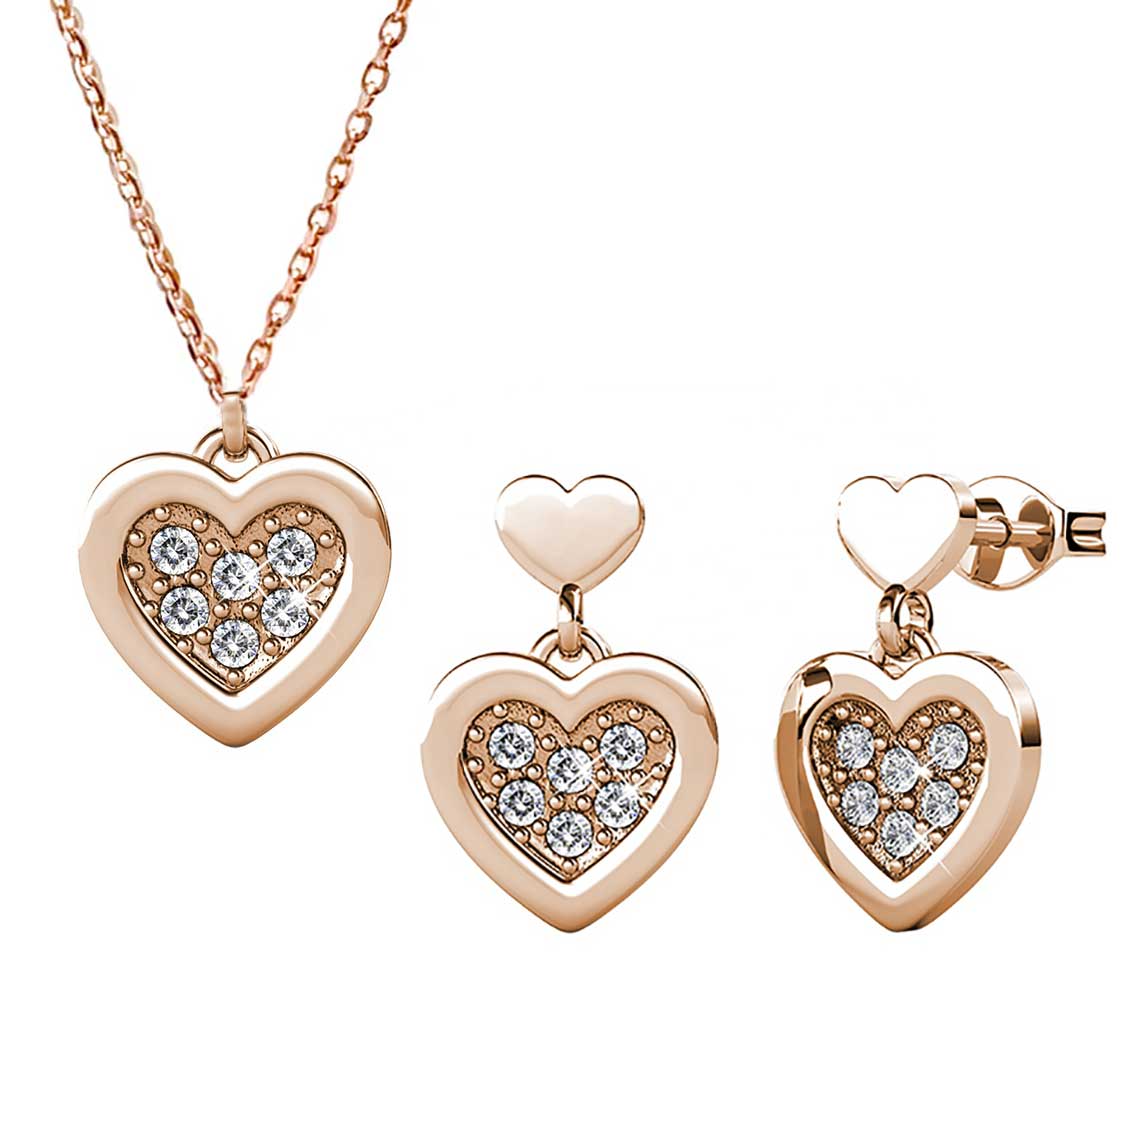 rose gold jewellery set crystals heart shape